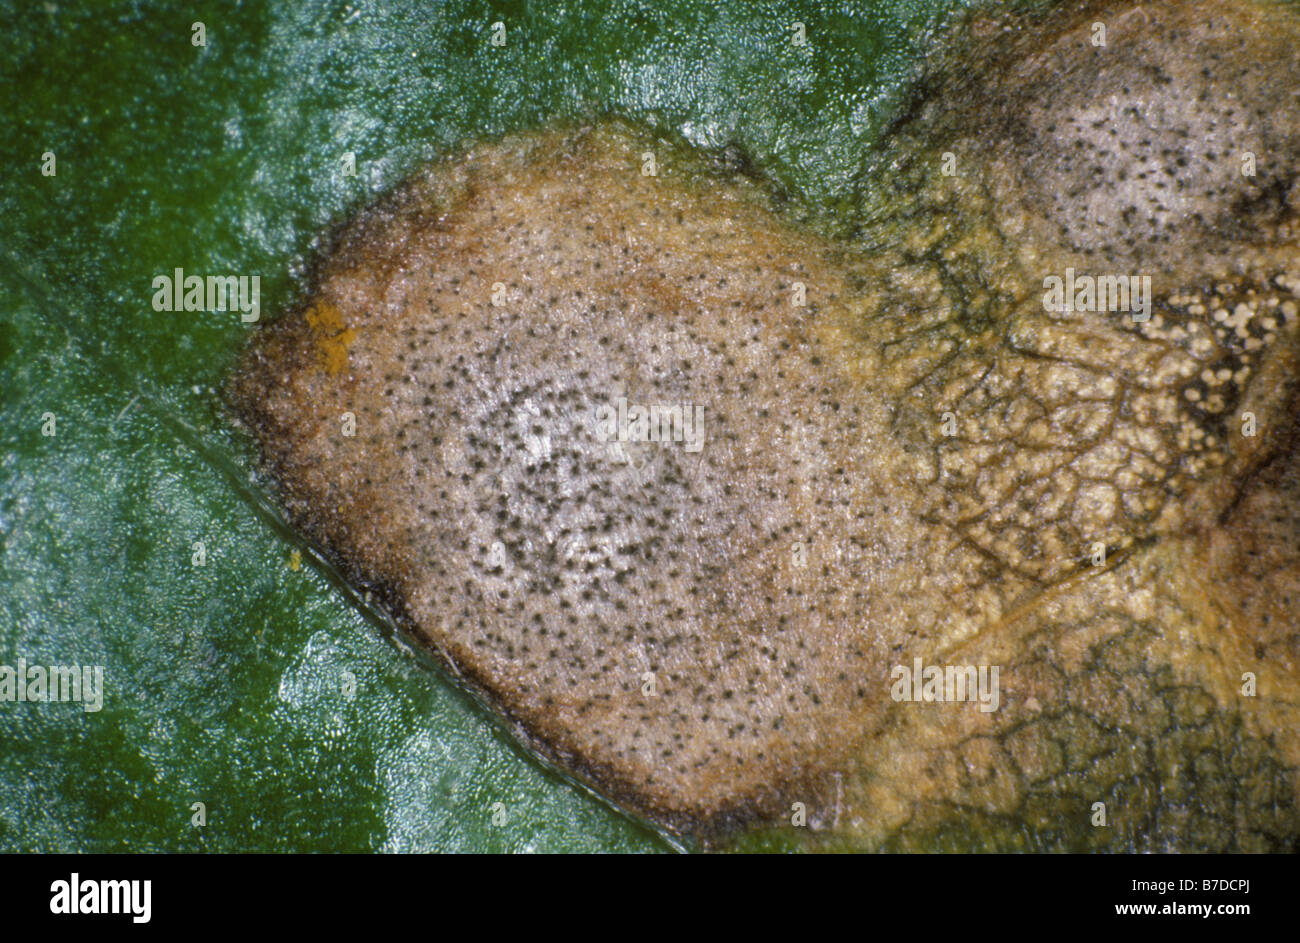 Photomicrograph of leaf spot Cercospora beticola lesion on a sugar beet leaf Stock Photo